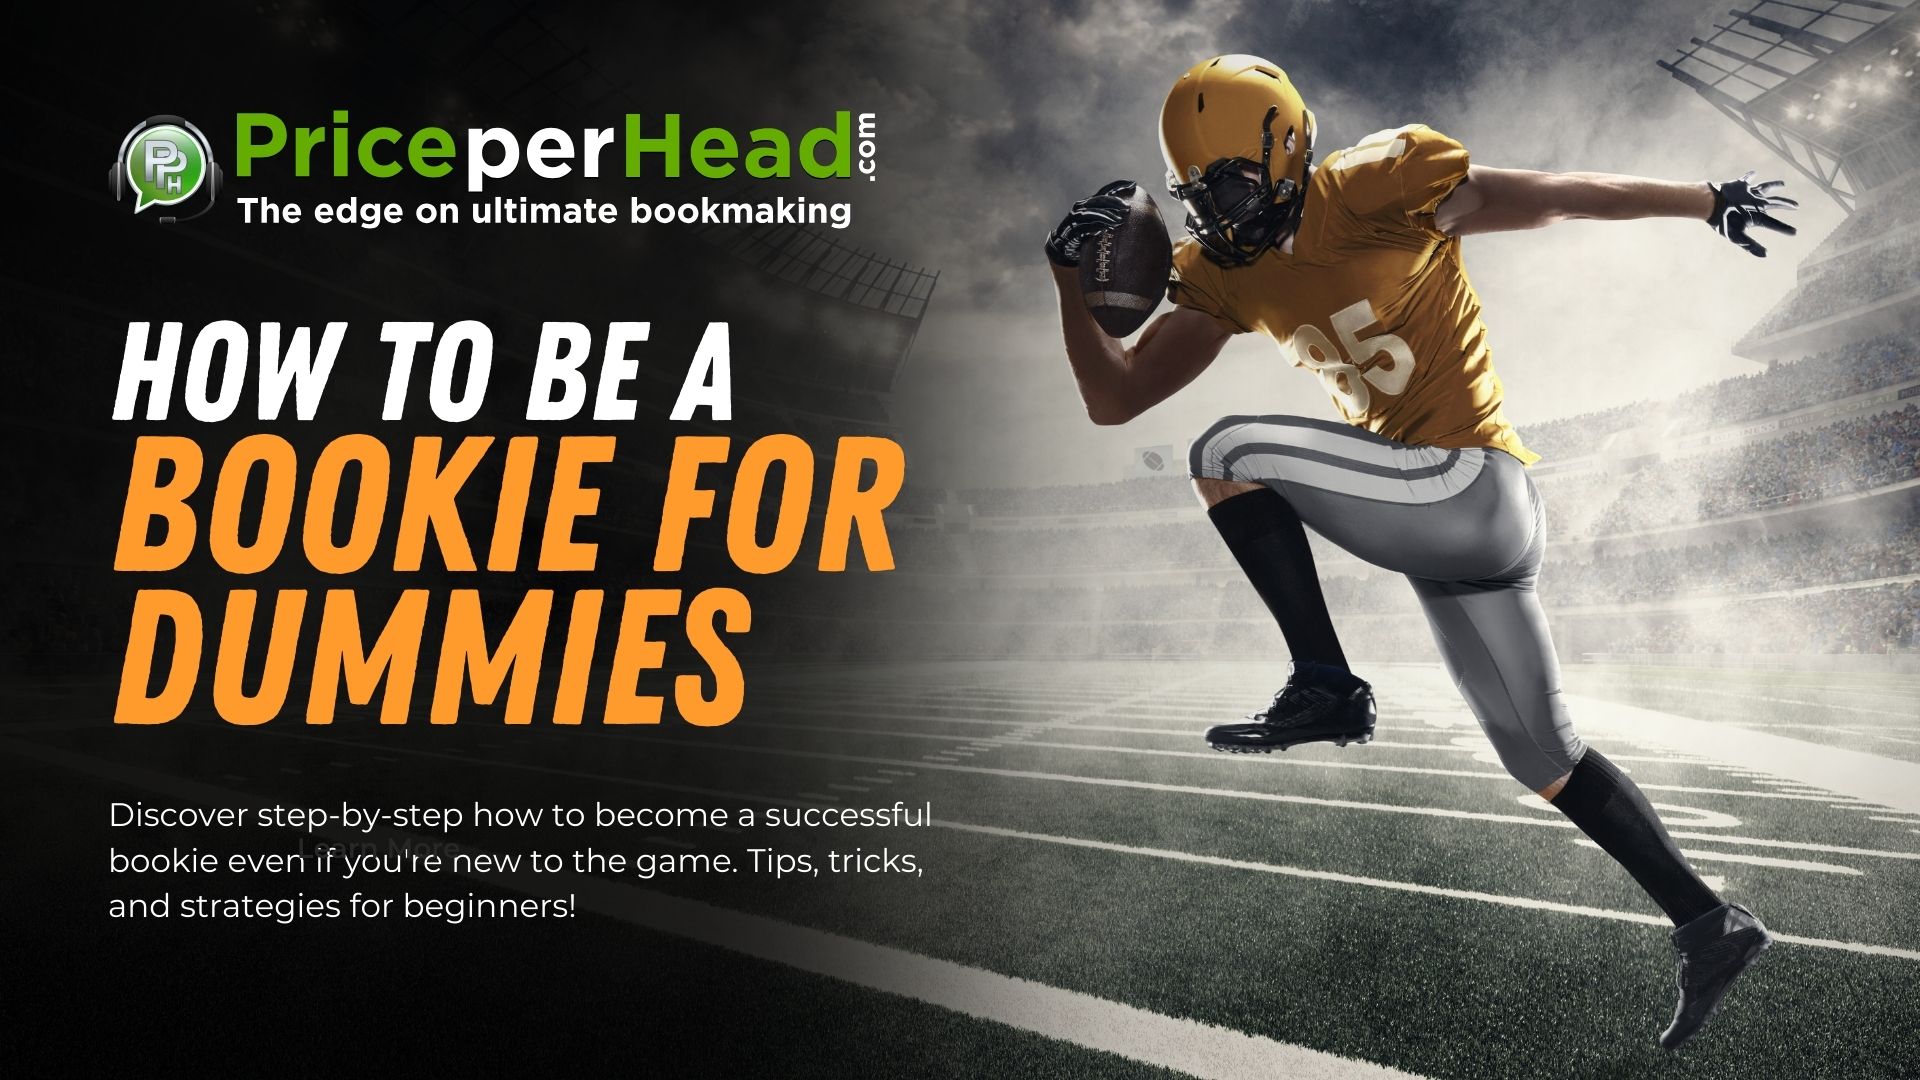 how to be a bookie for dummies, pay pe rhead, price per head